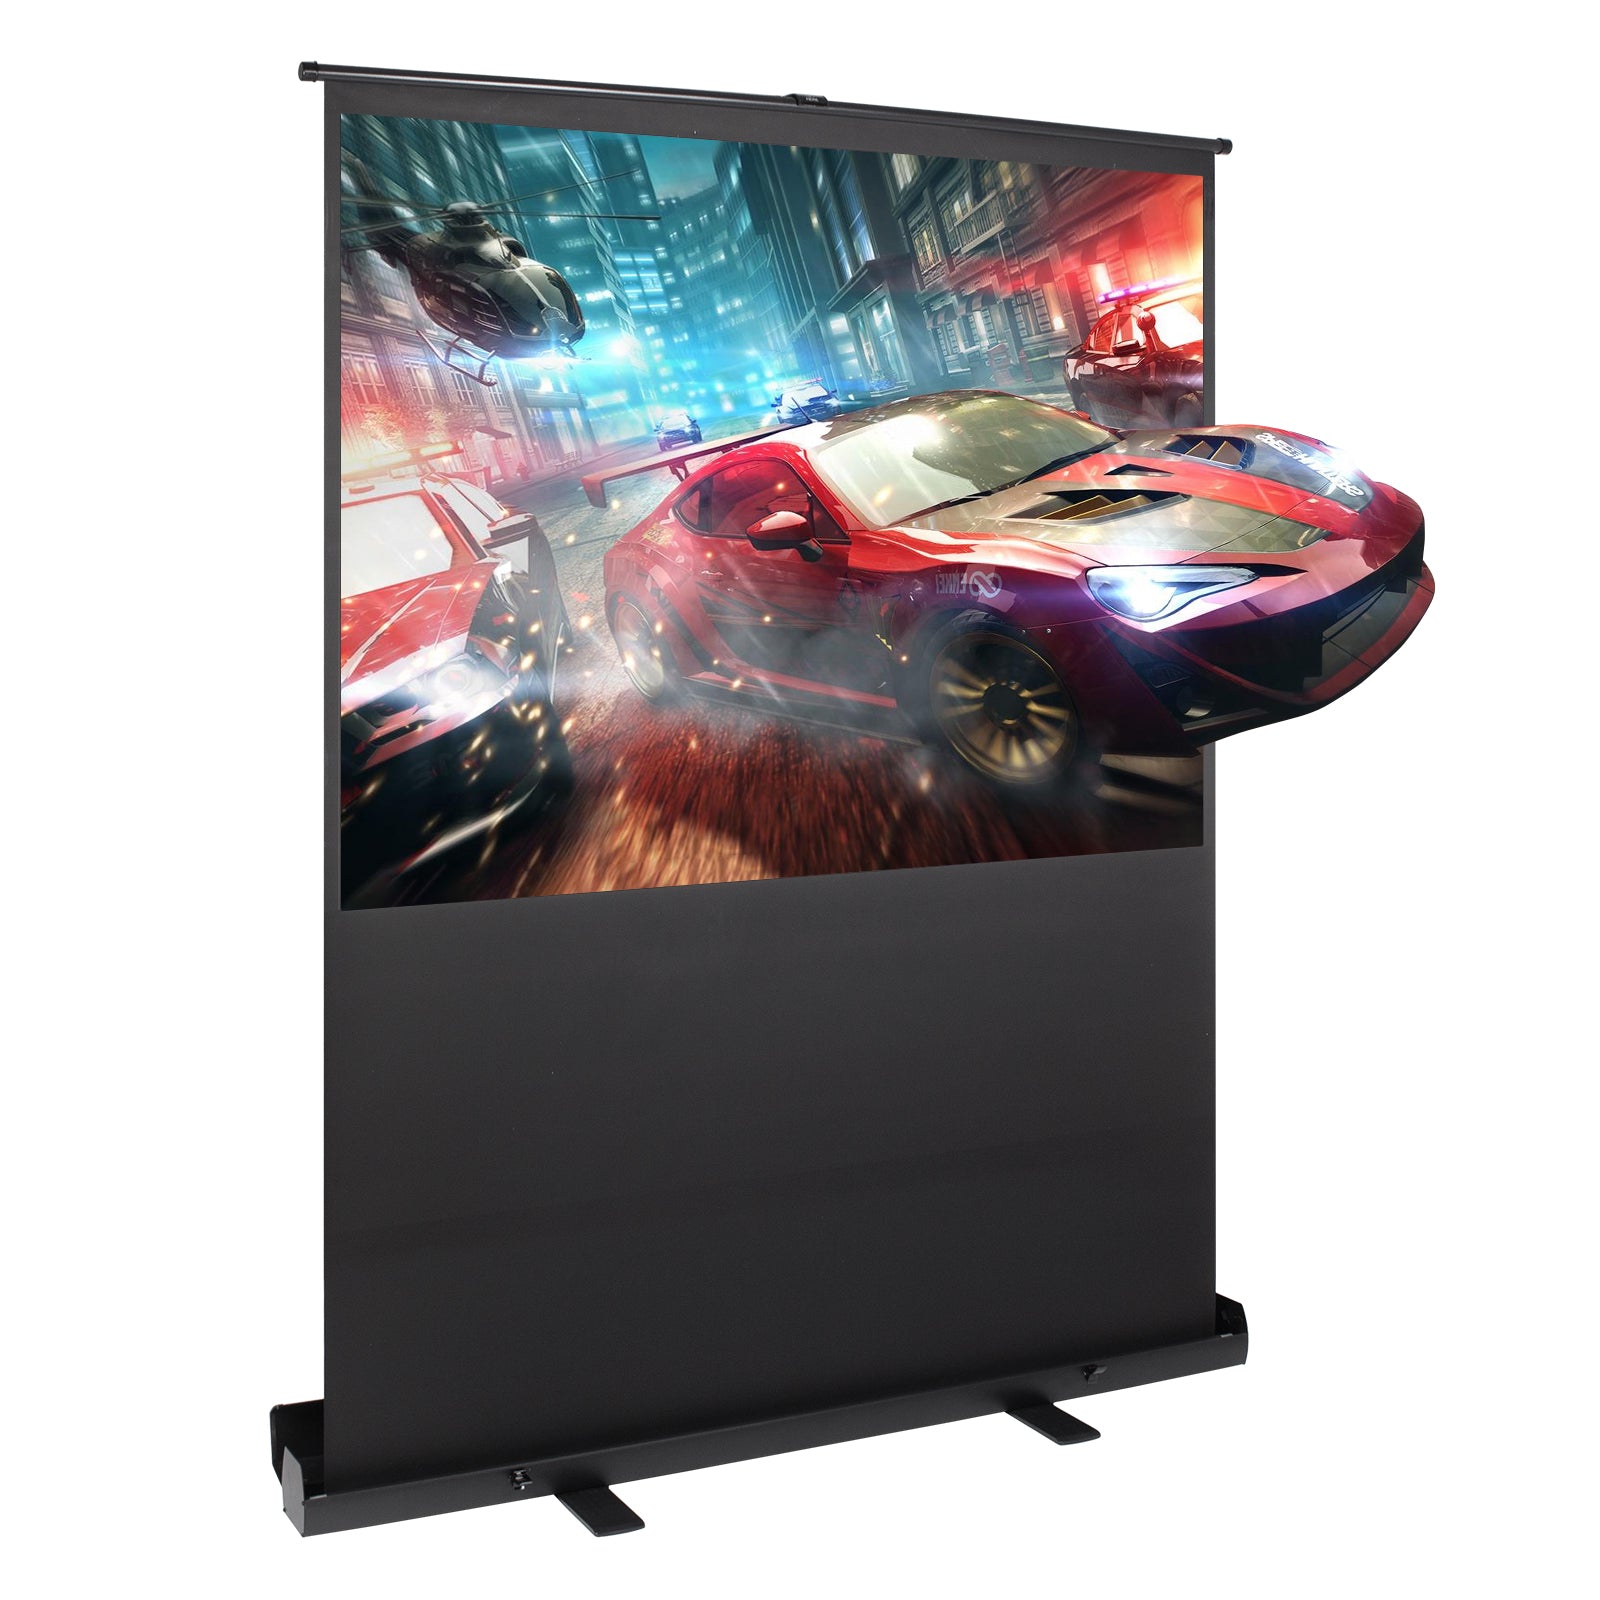 Todeco-72-inch-Portable-Projection-Screen-Floor-standing-Projection-Screen-146-x-109-cm-4-3-Full-HD-3D